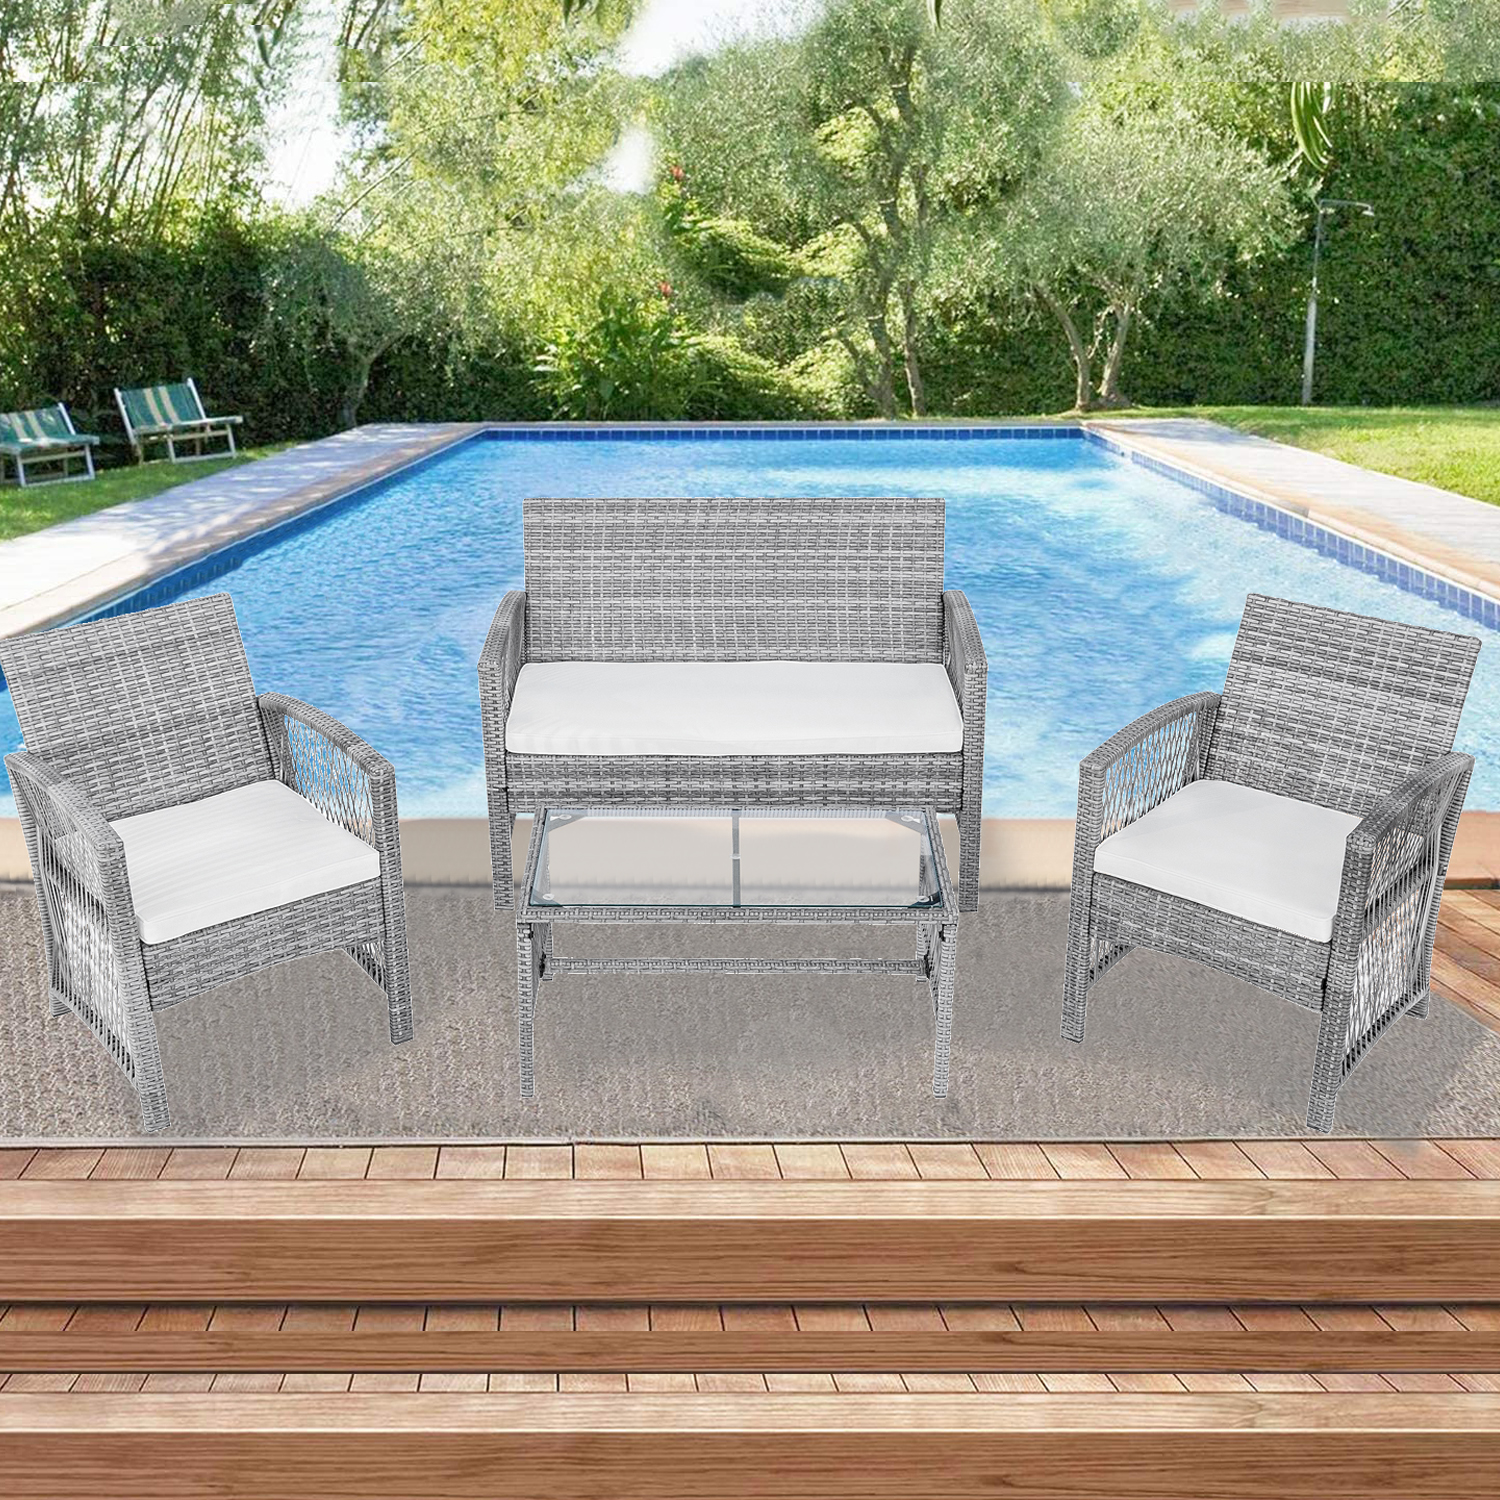 Outdoor Patio Furniture Sets, 4 Piece Gray Wicker Outdoor Porch Conversation Sets, 2pcs Arm Chairs, 1pc Loveseat&Coffee Table, Patio Bar Set, Dining Set for Backyard Lawn Porch Poolside Garden, W7776 - image 1 of 11